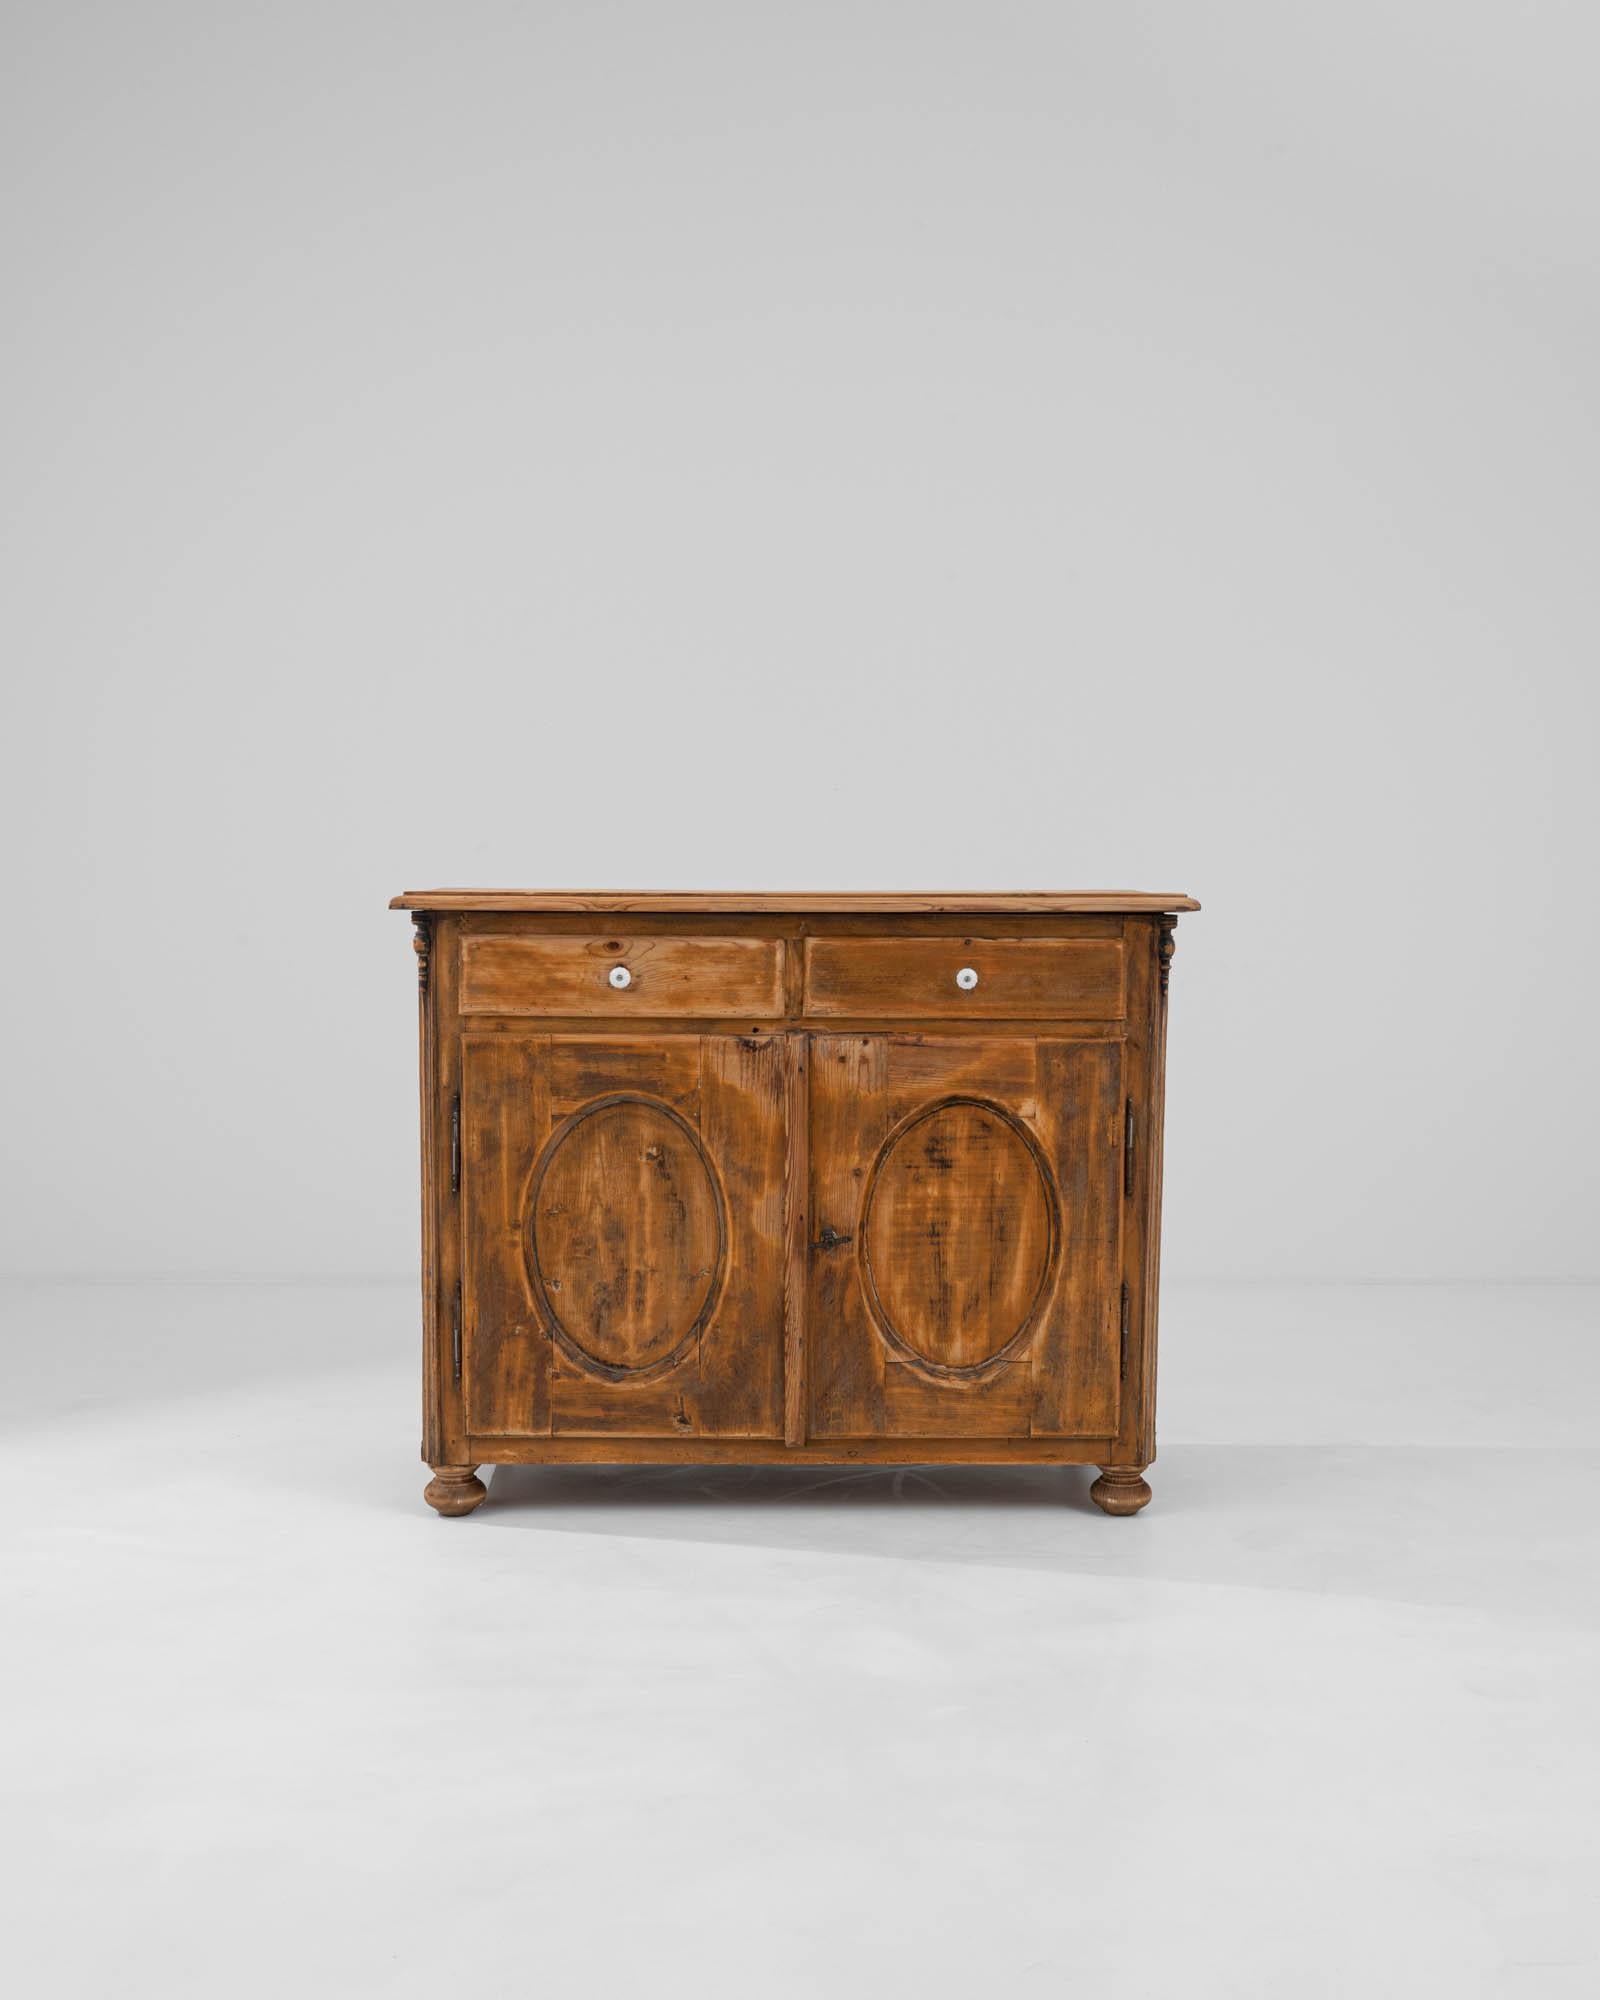 Introducing the 1900s French Wooden Buffet, a piece that whispers tales of bygone soirées and timeless elegance. This exquisite buffet, crafted in the early 20th century, showcases the warmth and patina only found in true vintage furnishings. With